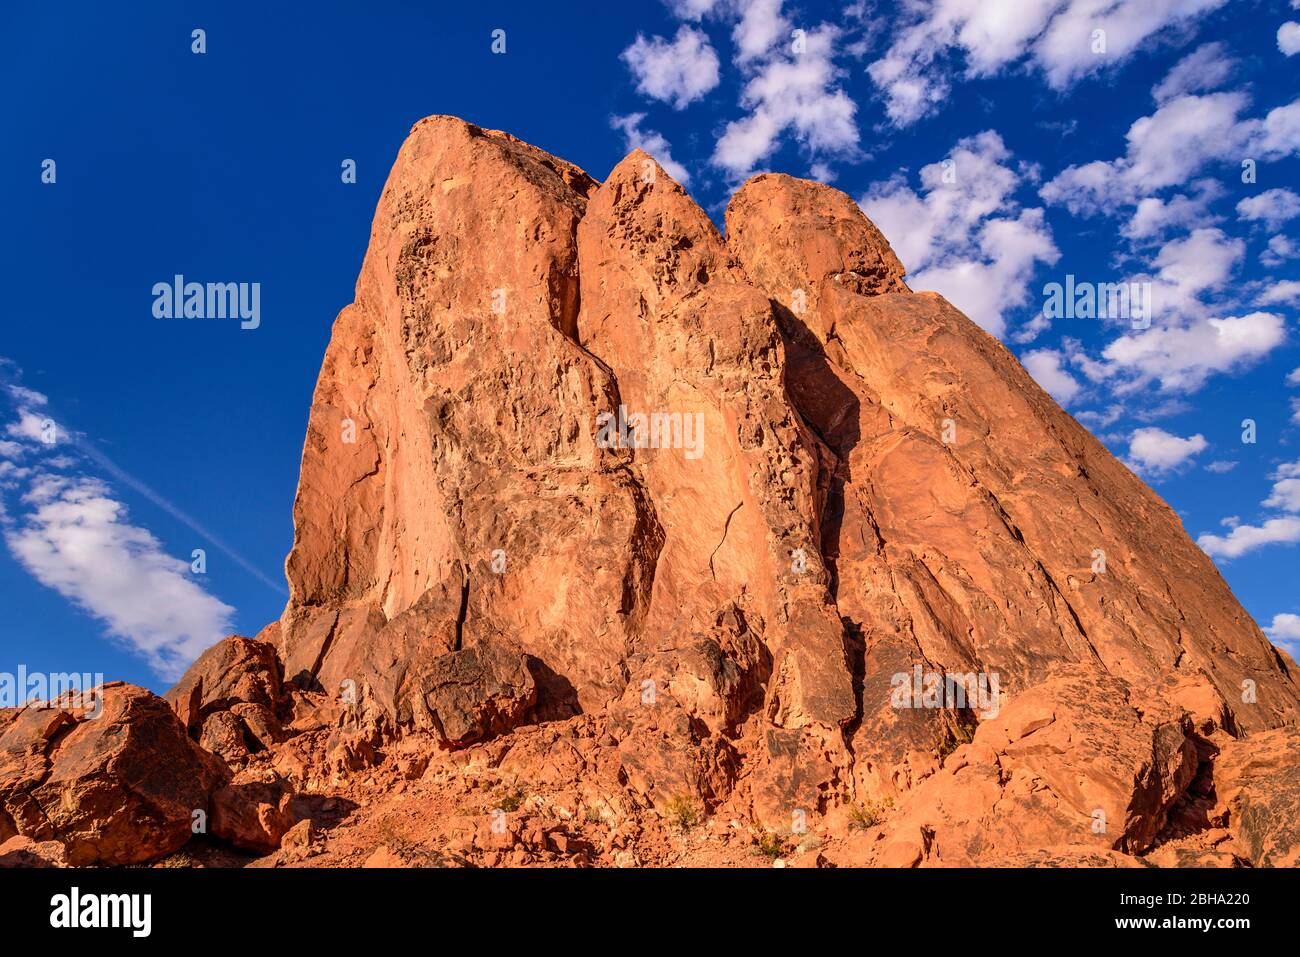 USA, Nevada, Clark County, Overton, Valley of Fire state Park, White Domes Scenic Byway, Gibilterra Rock Foto Stock